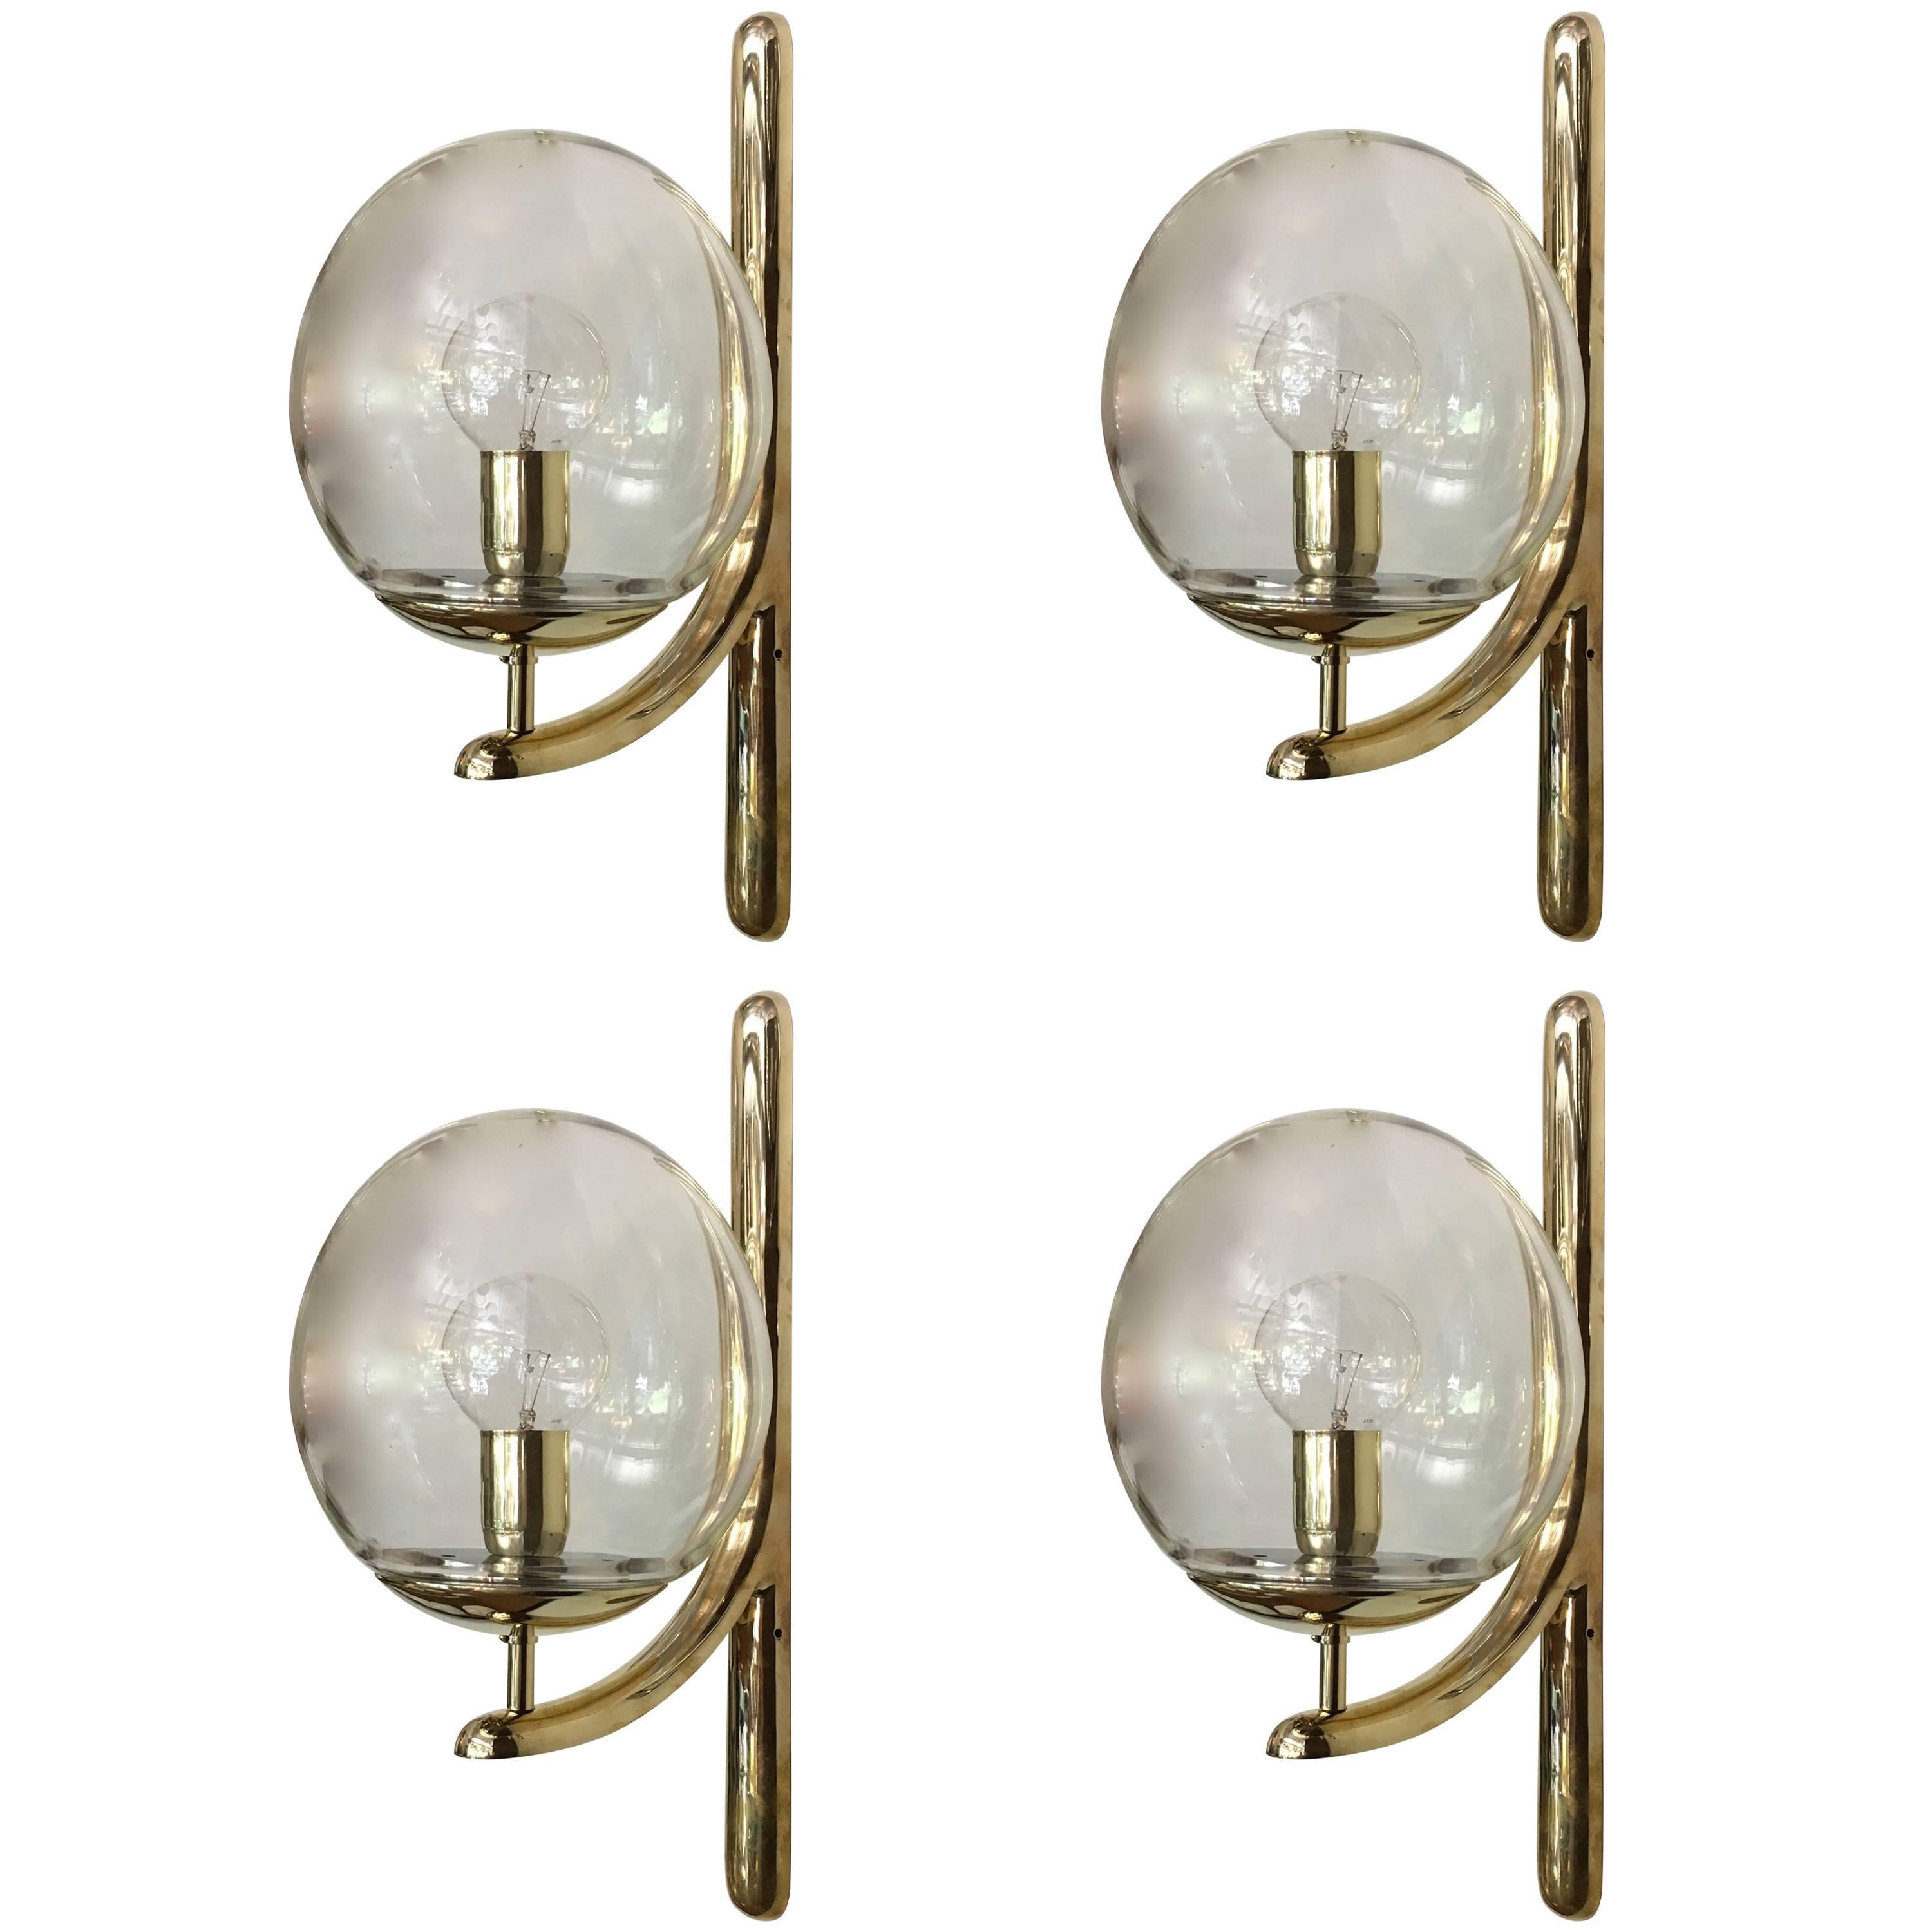 Large Signed Venini Cast Brass Wall Sconces with Glass Ball Shades